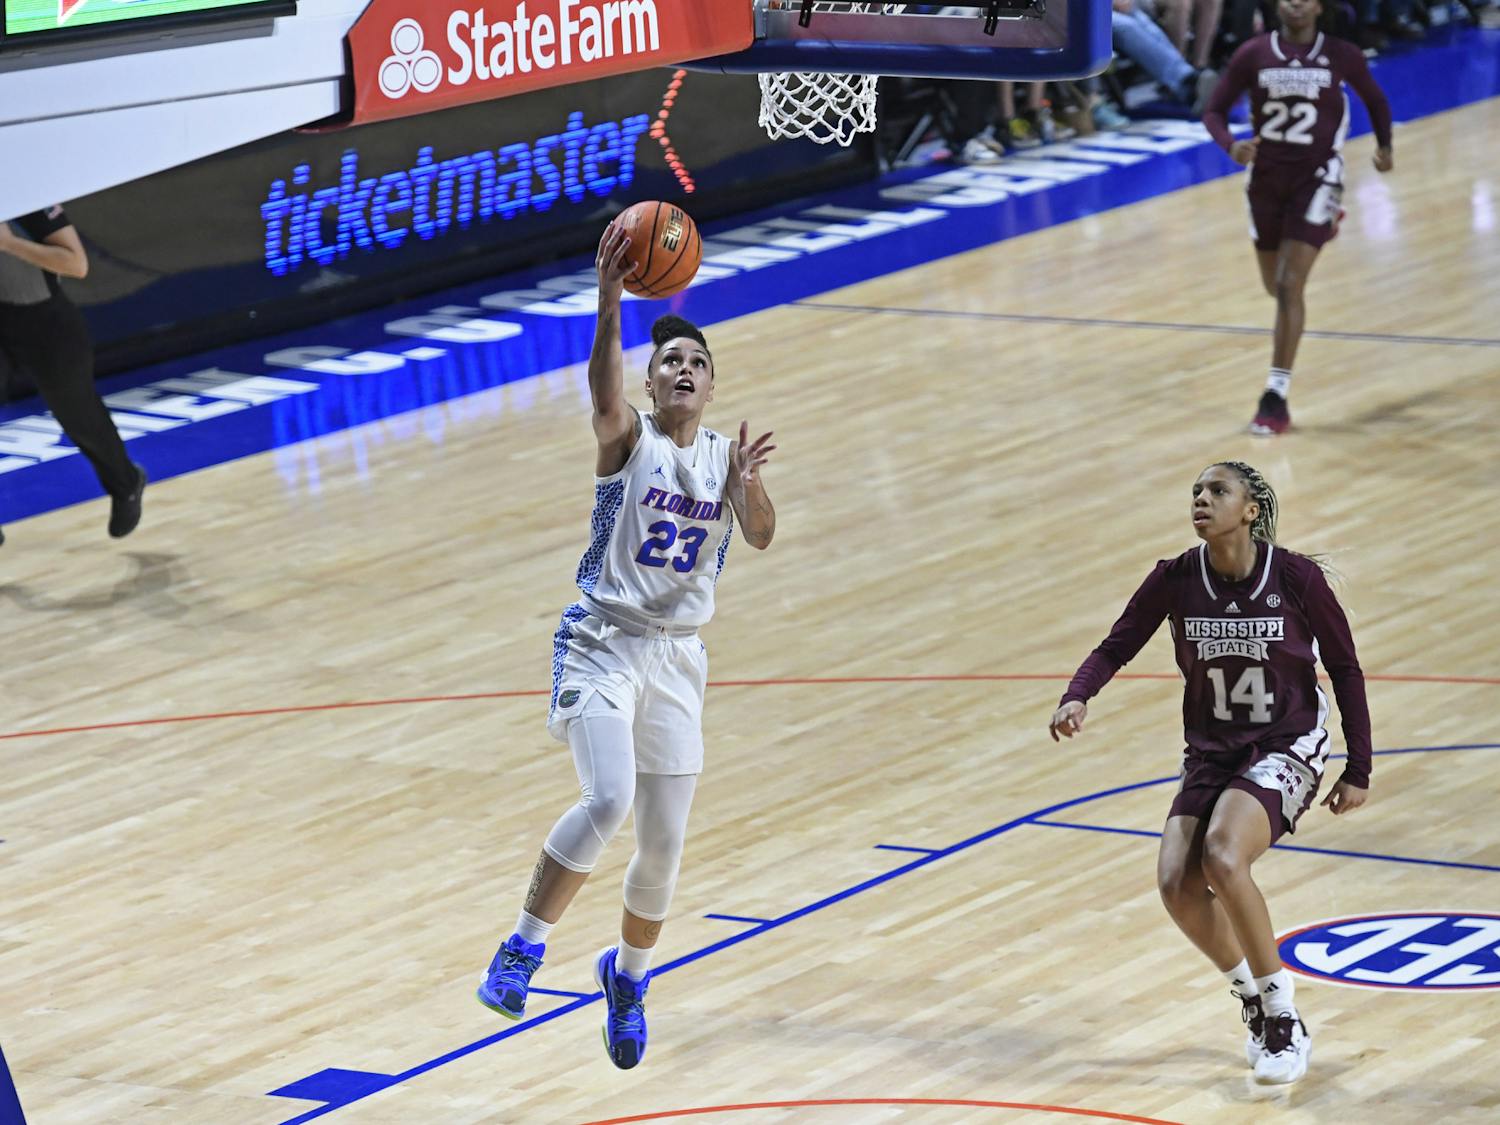 Senior guard Leilani Correa shoots a layup in the Gators' 89-77 loss against the Mississippi State Bulldogs on Jan. 22, 2024.